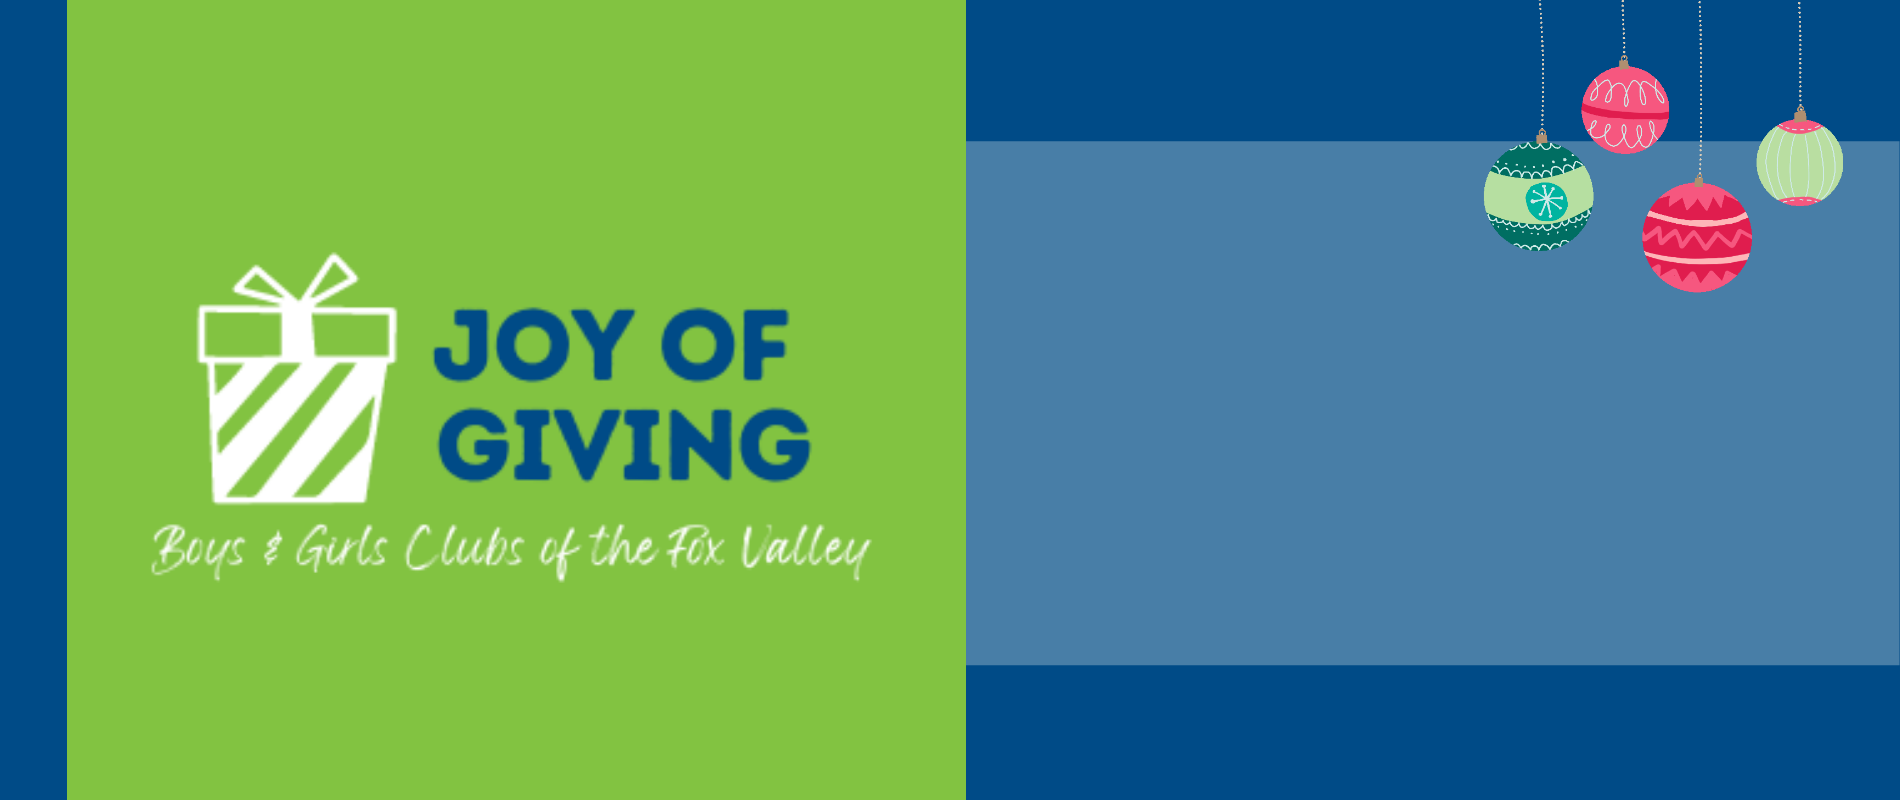 Joy of Giving graphic banner